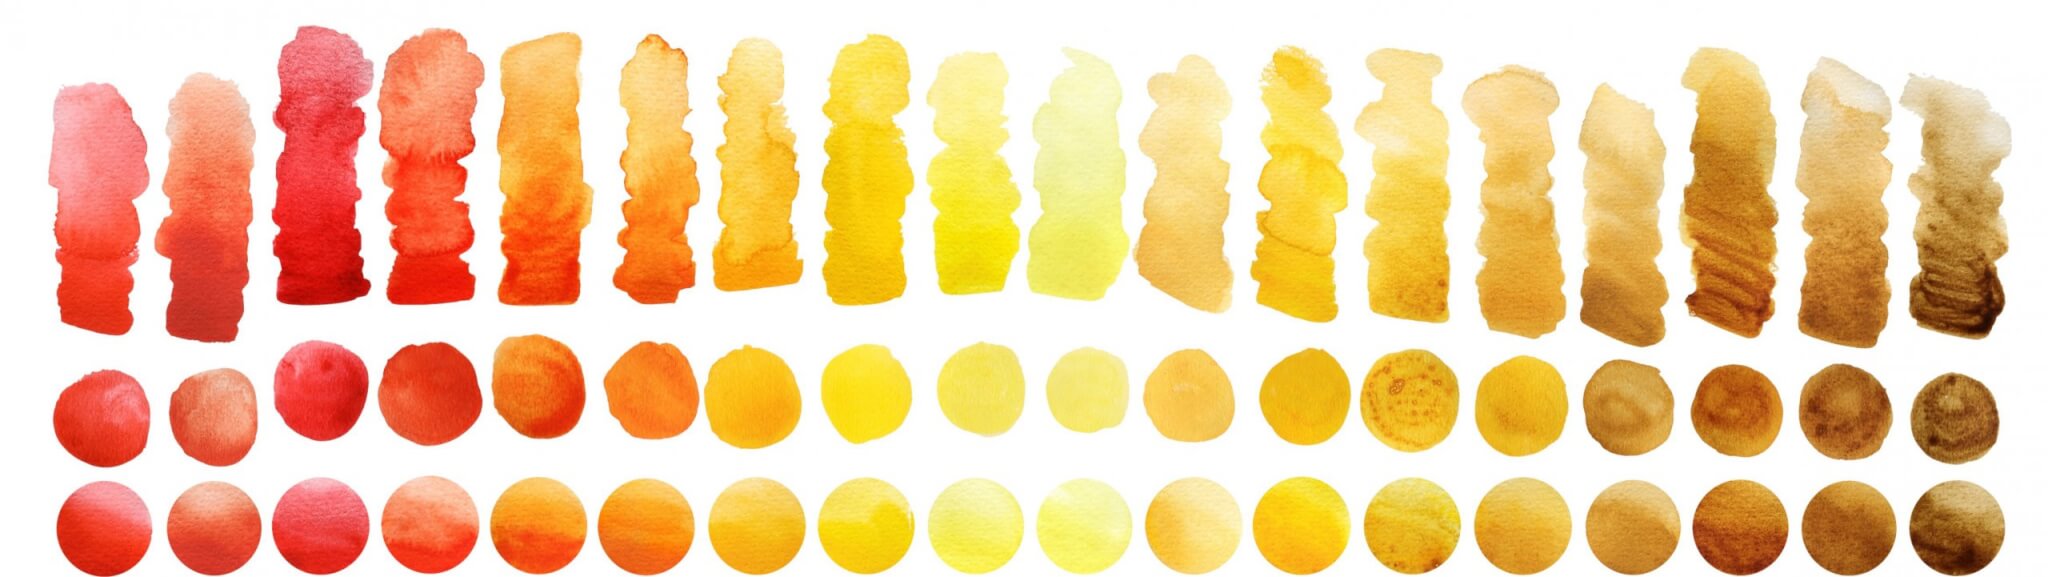 Urine Color - Chart, What Color Is Normal, What Does It Mean